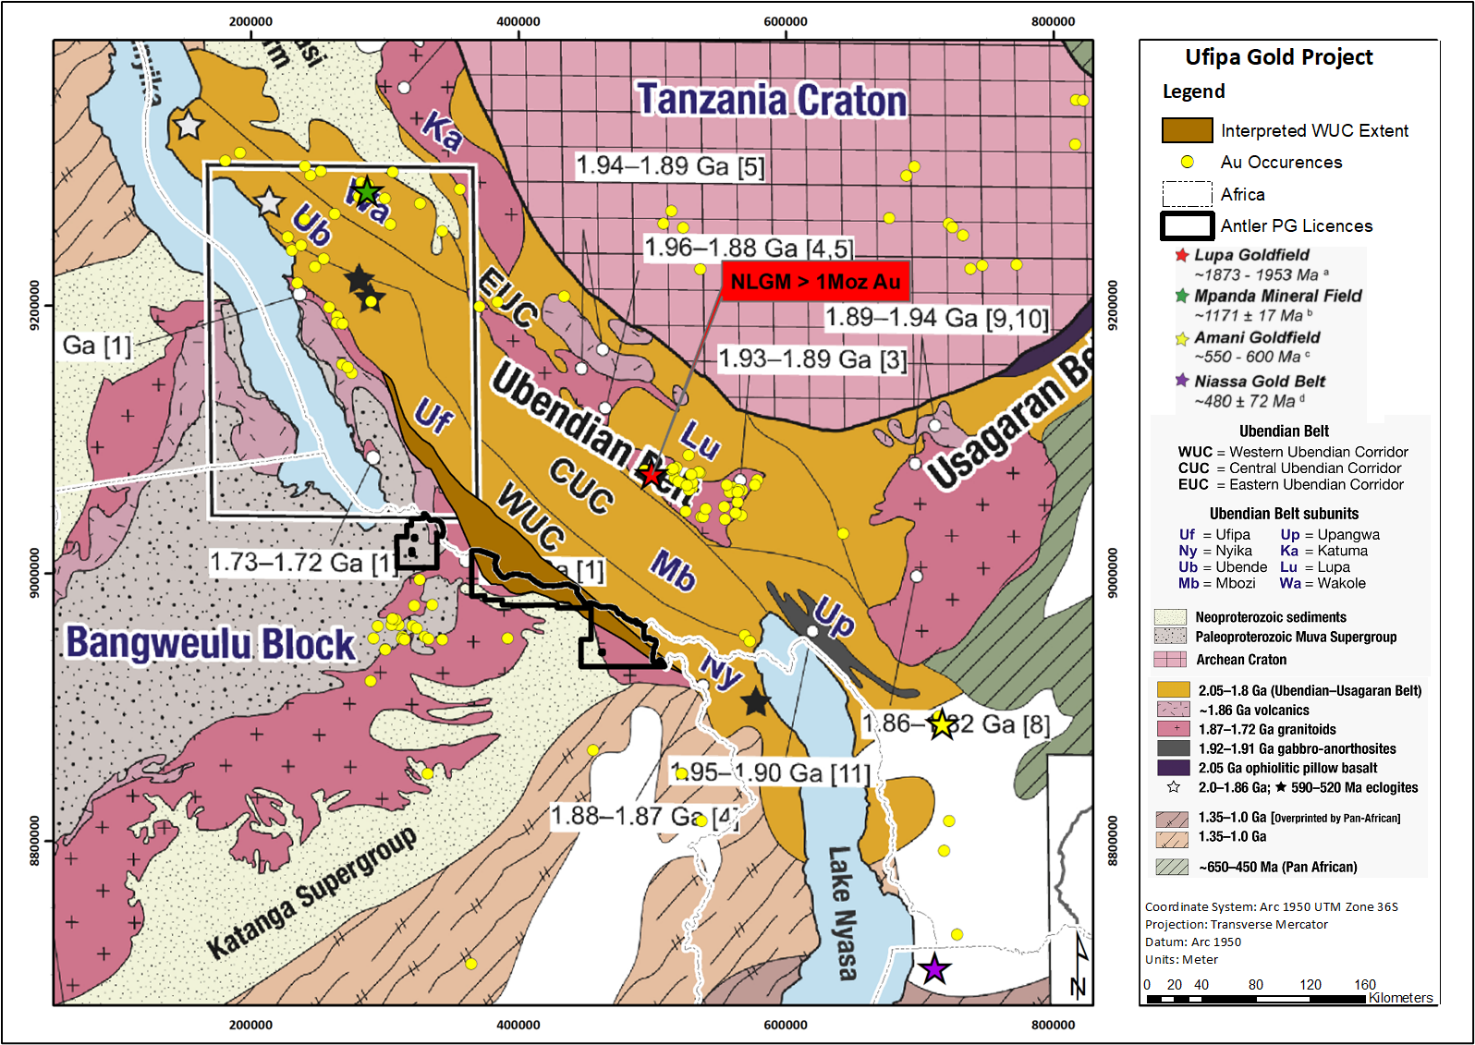 Figure 2: Regional geological map showing the Precambrian regional context of the Ubendian Belt between the Tanzania Craton and the Bangweulu Block (Map modified from Ganbat et al 2021).